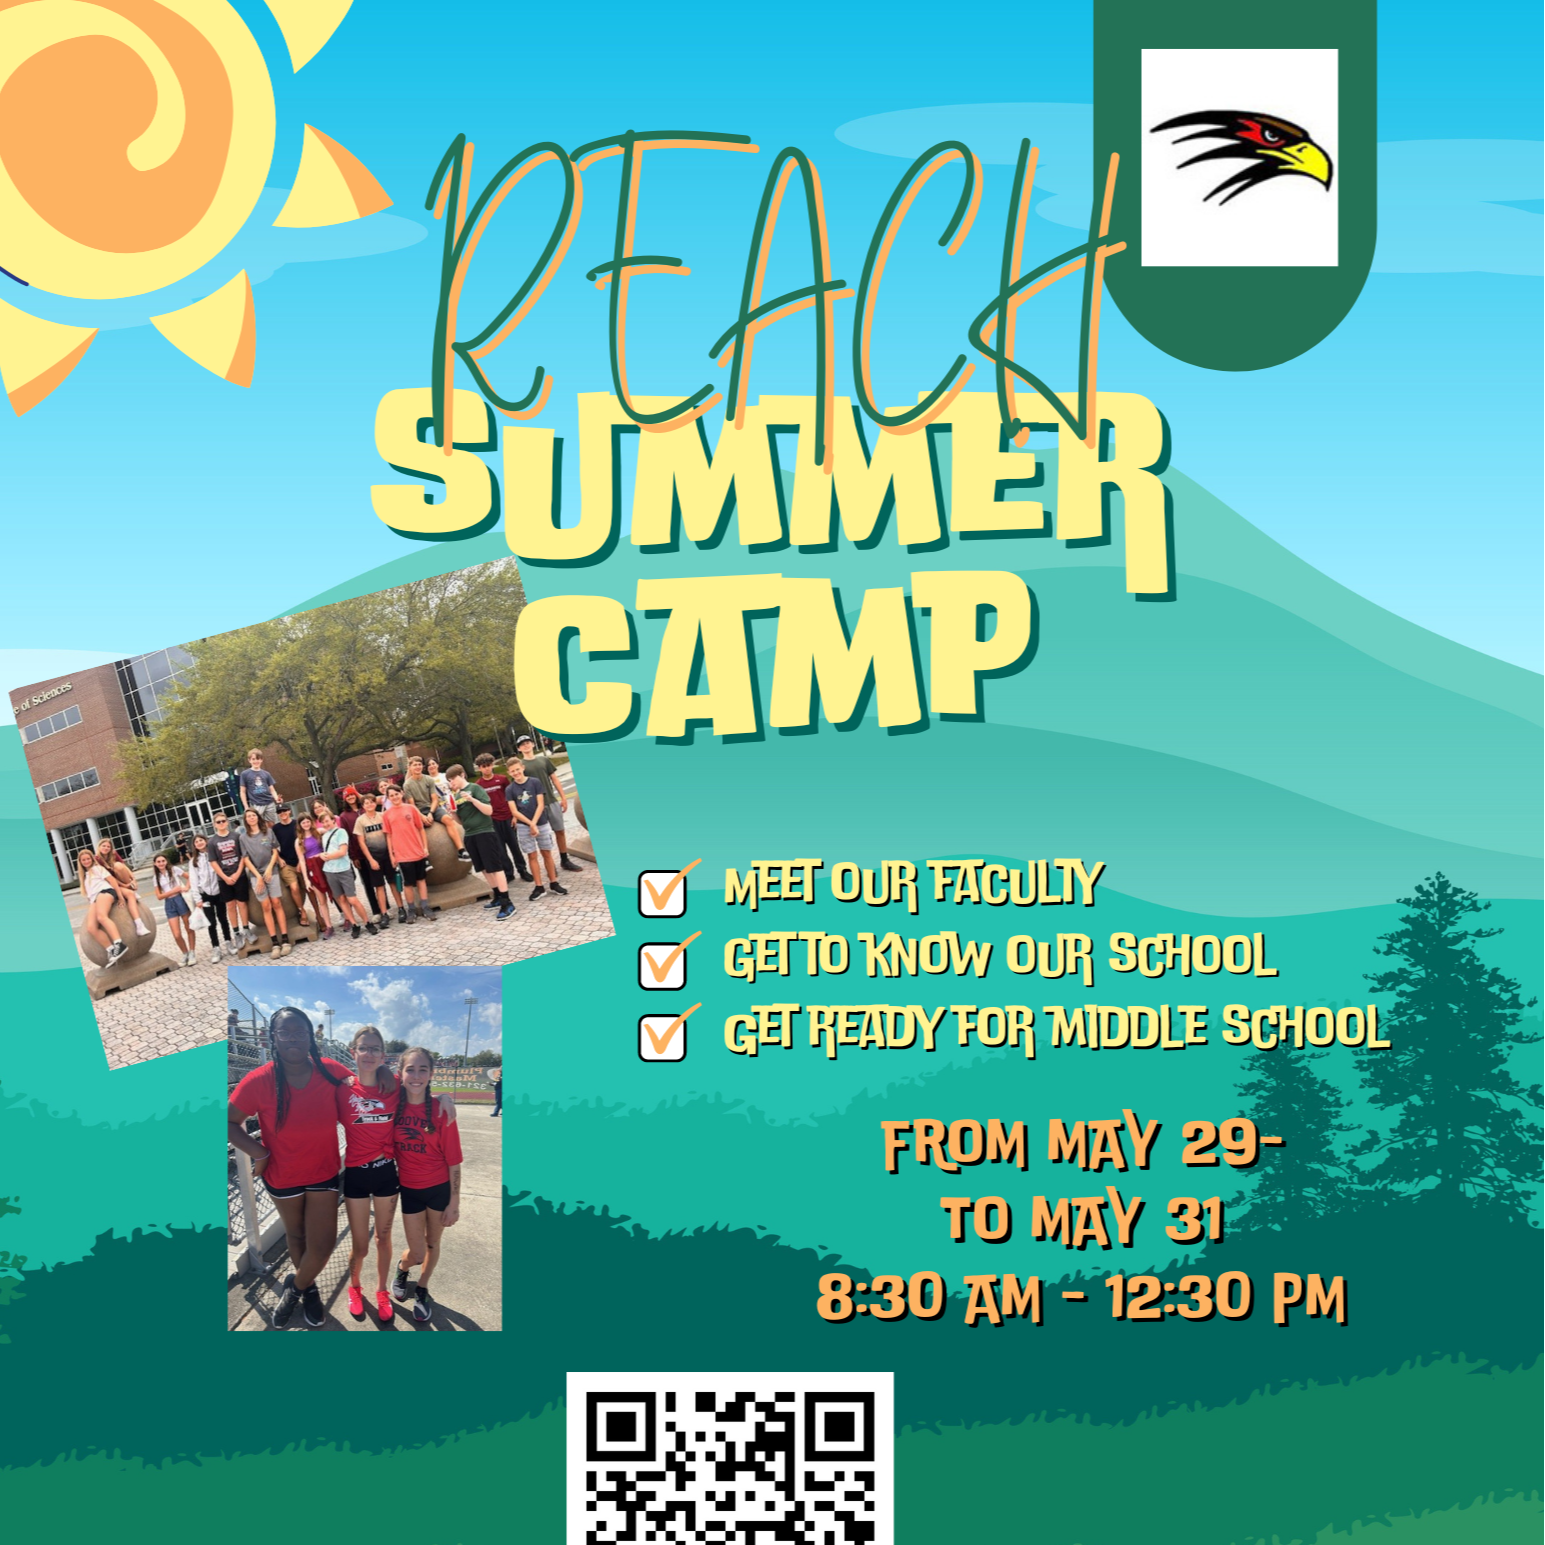 Image of REACH summer camp flyer with details.